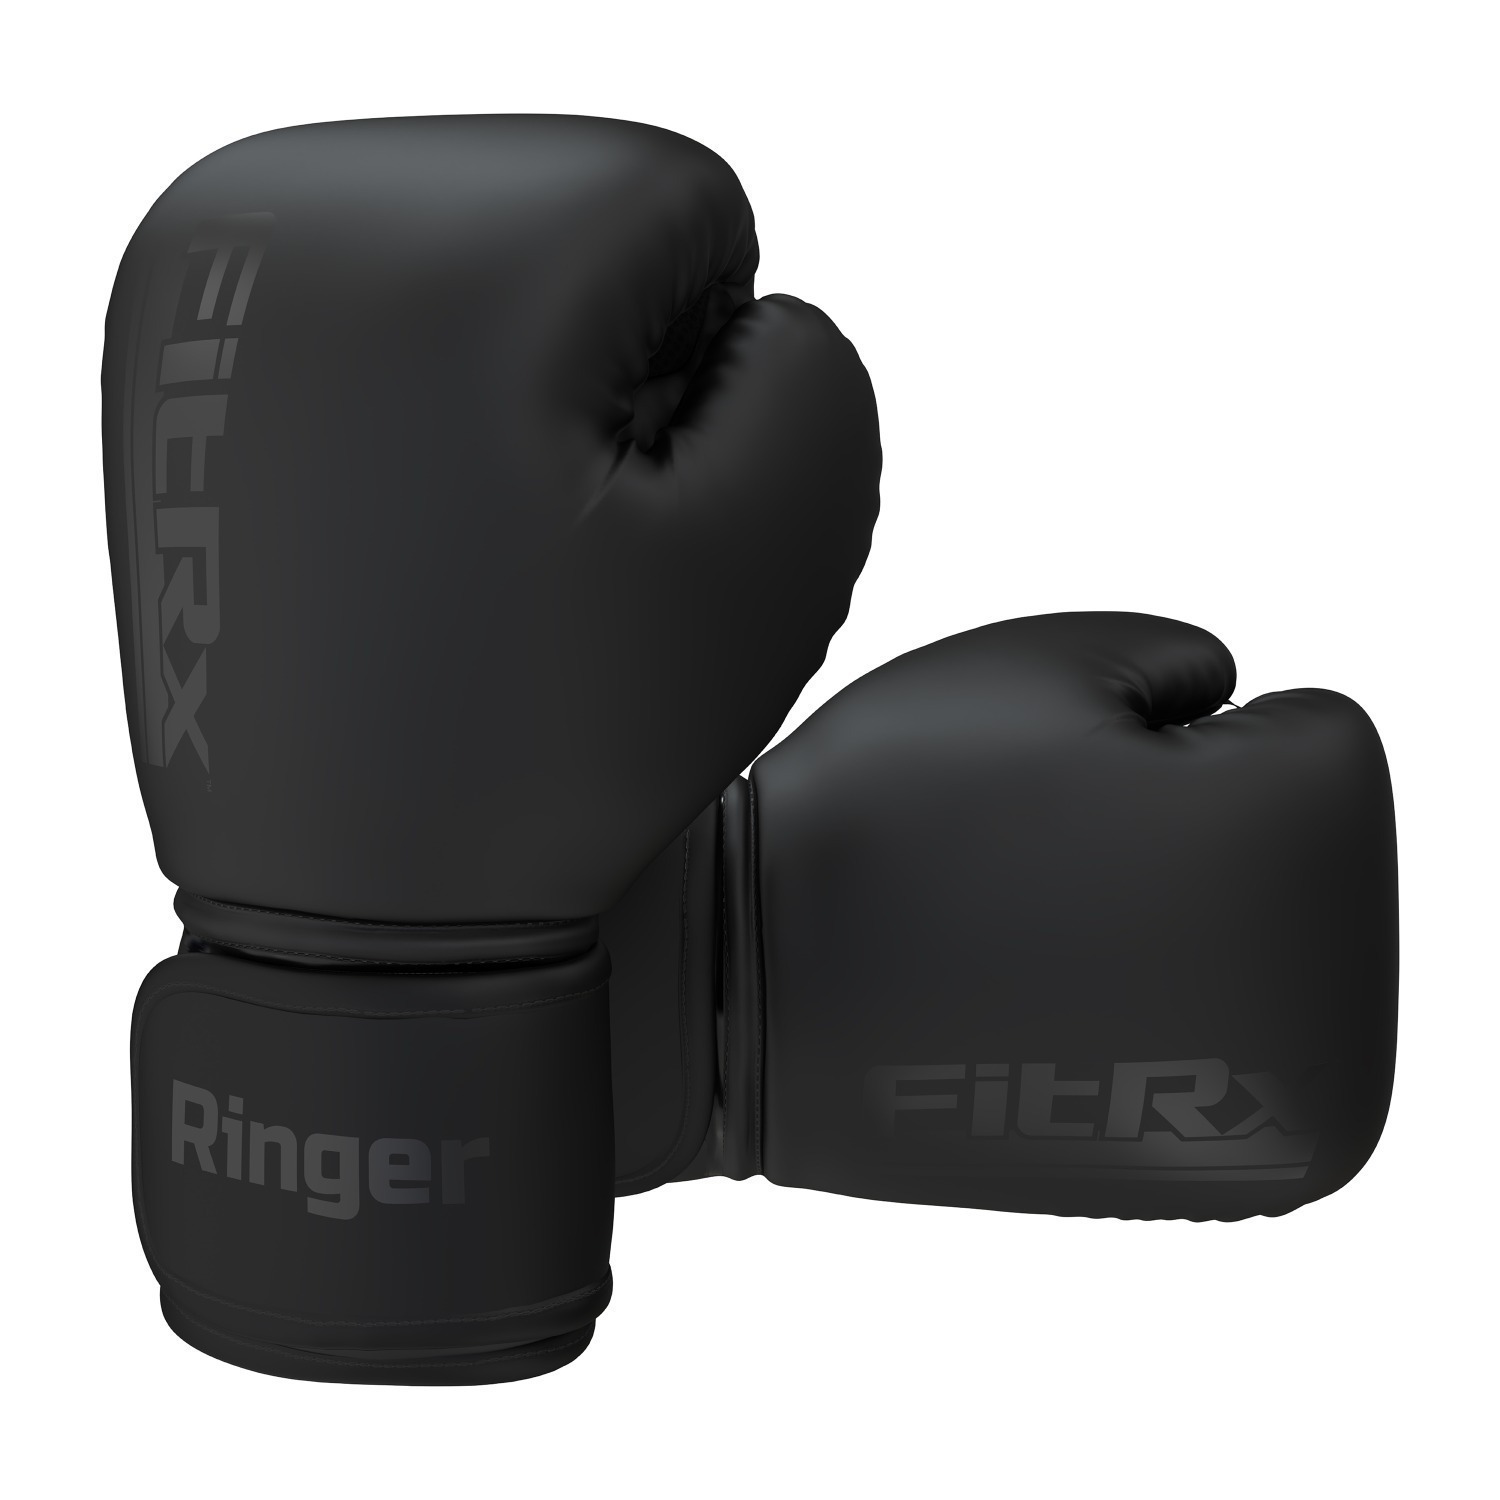 12oz FitRX Boxing Gloves $14.99 W/ Free shipping on orders $35+.